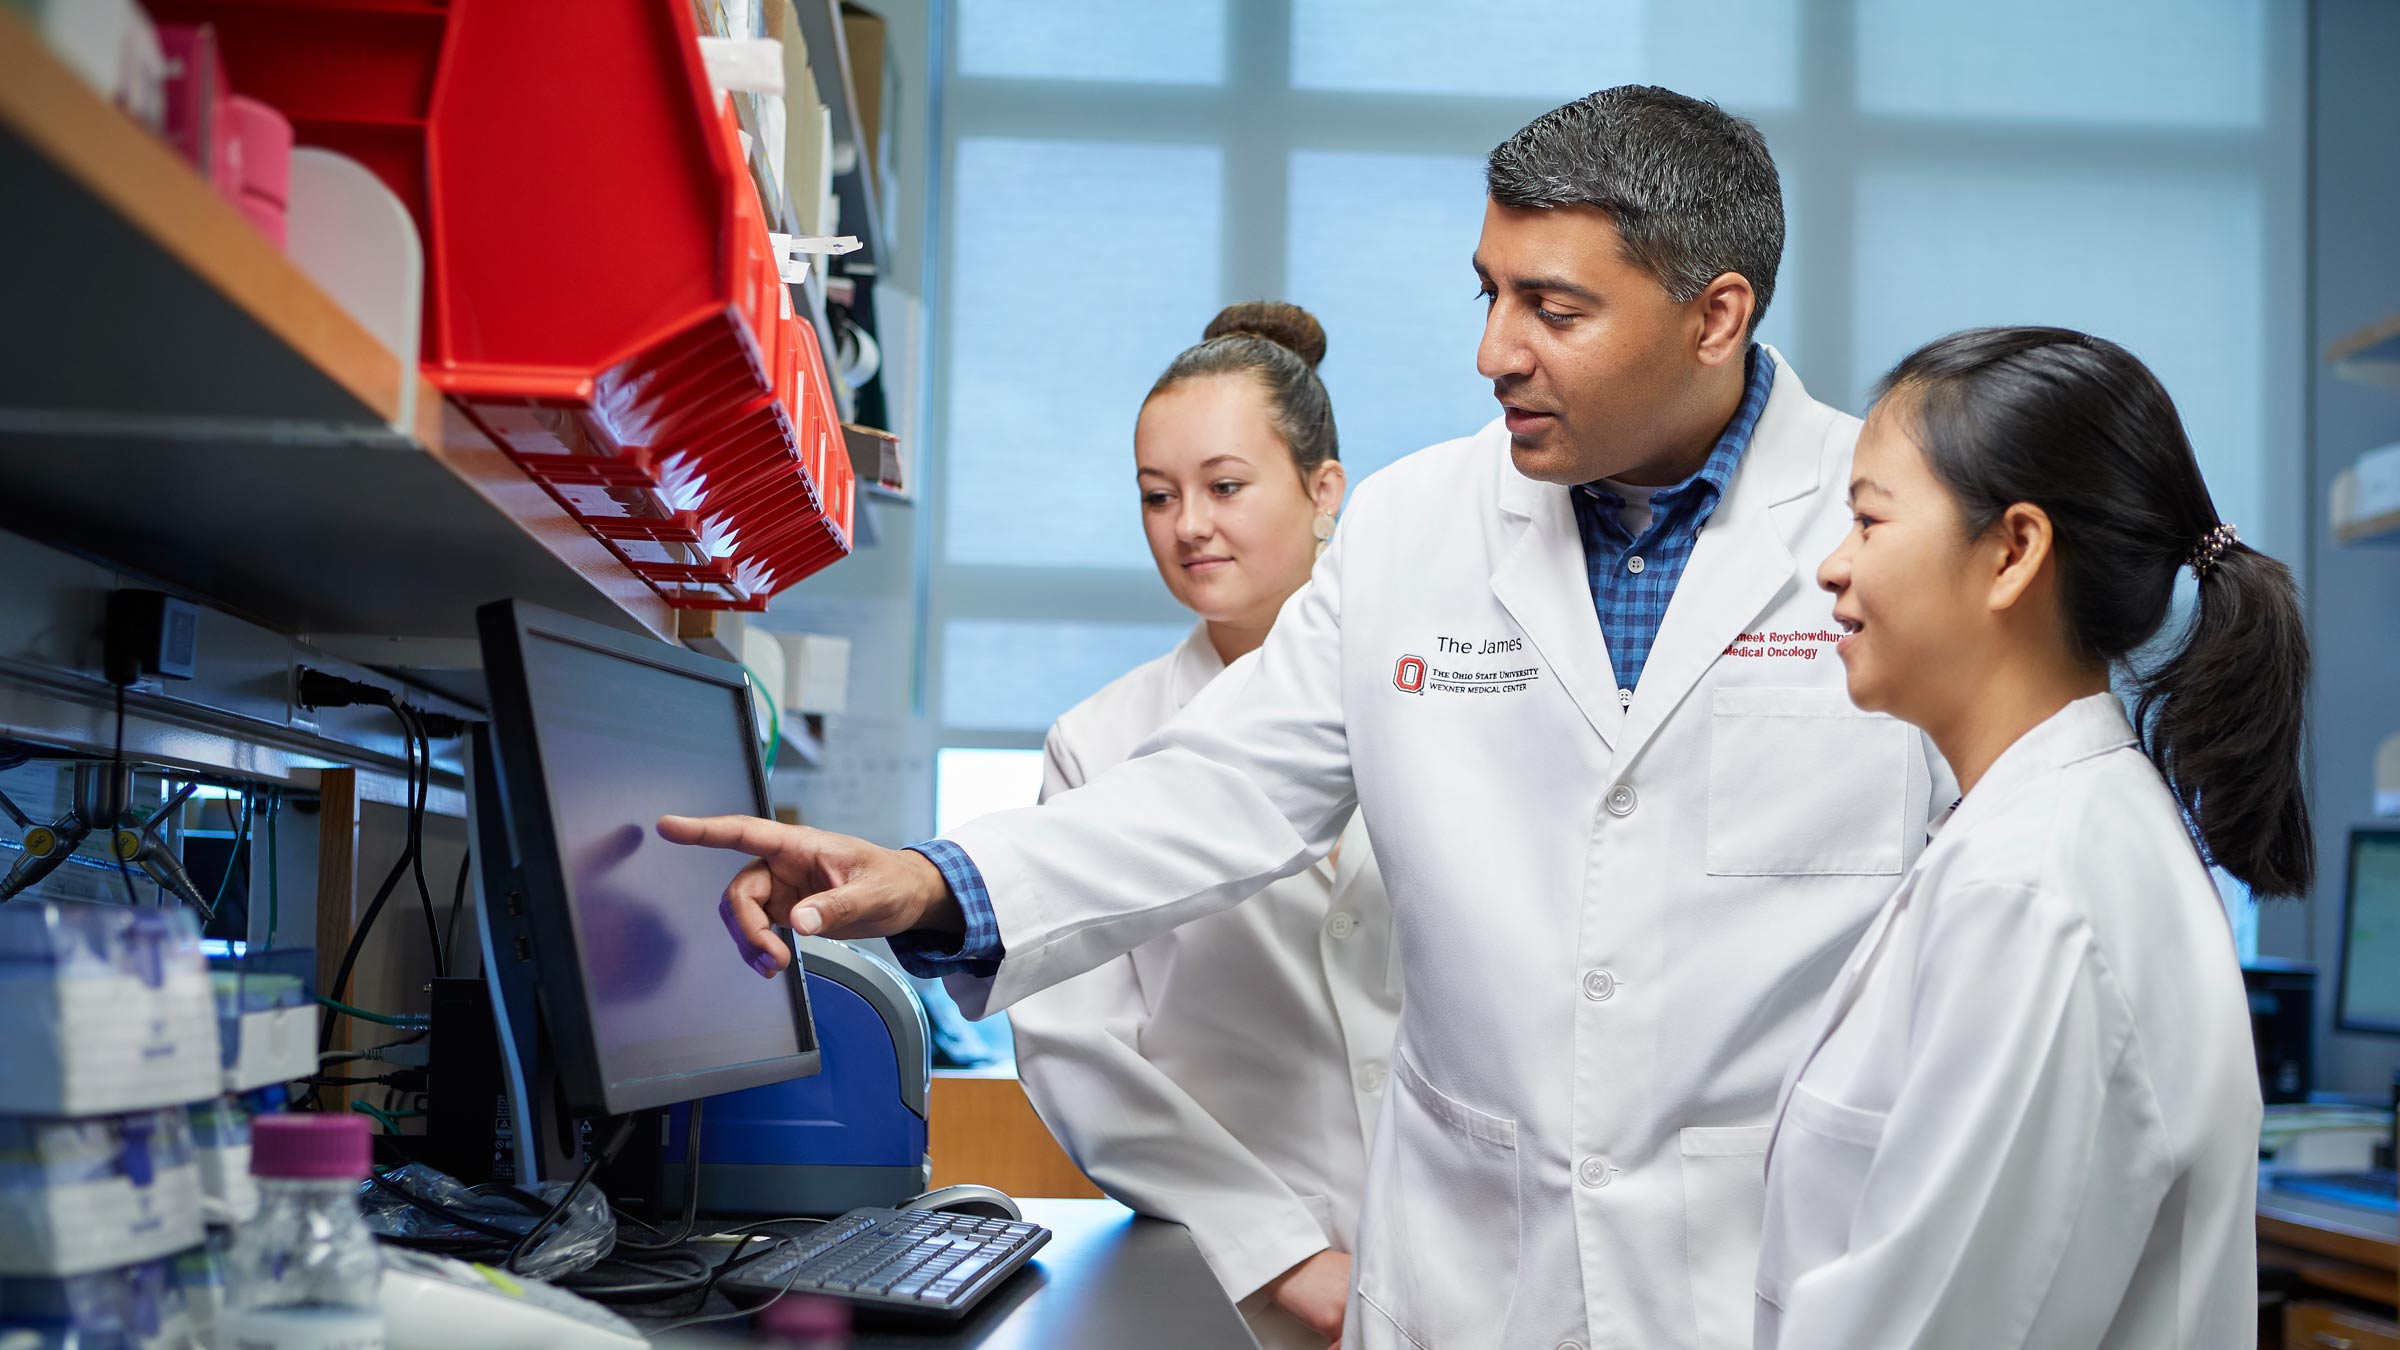 Sameek Roychowdhury, MD, PhD, consults with research colleagues in a precision cancer medicine lab at the OSUCCC – James.